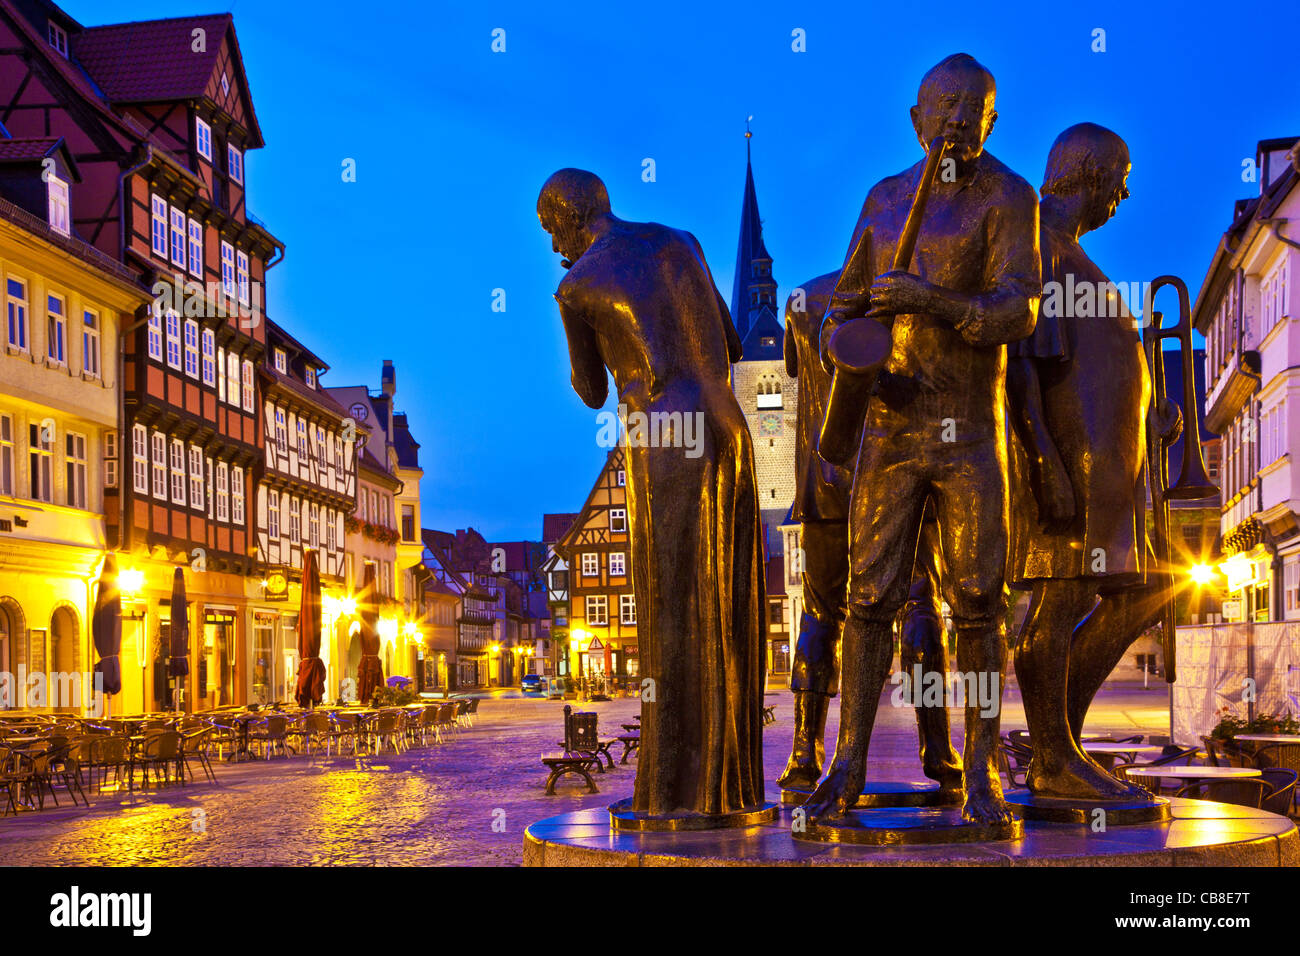 Twilight in the market place or square, the Markt, in Quedlinburg, Germany with statue of Muenzenberg Musicians in foreground. Stock Photo